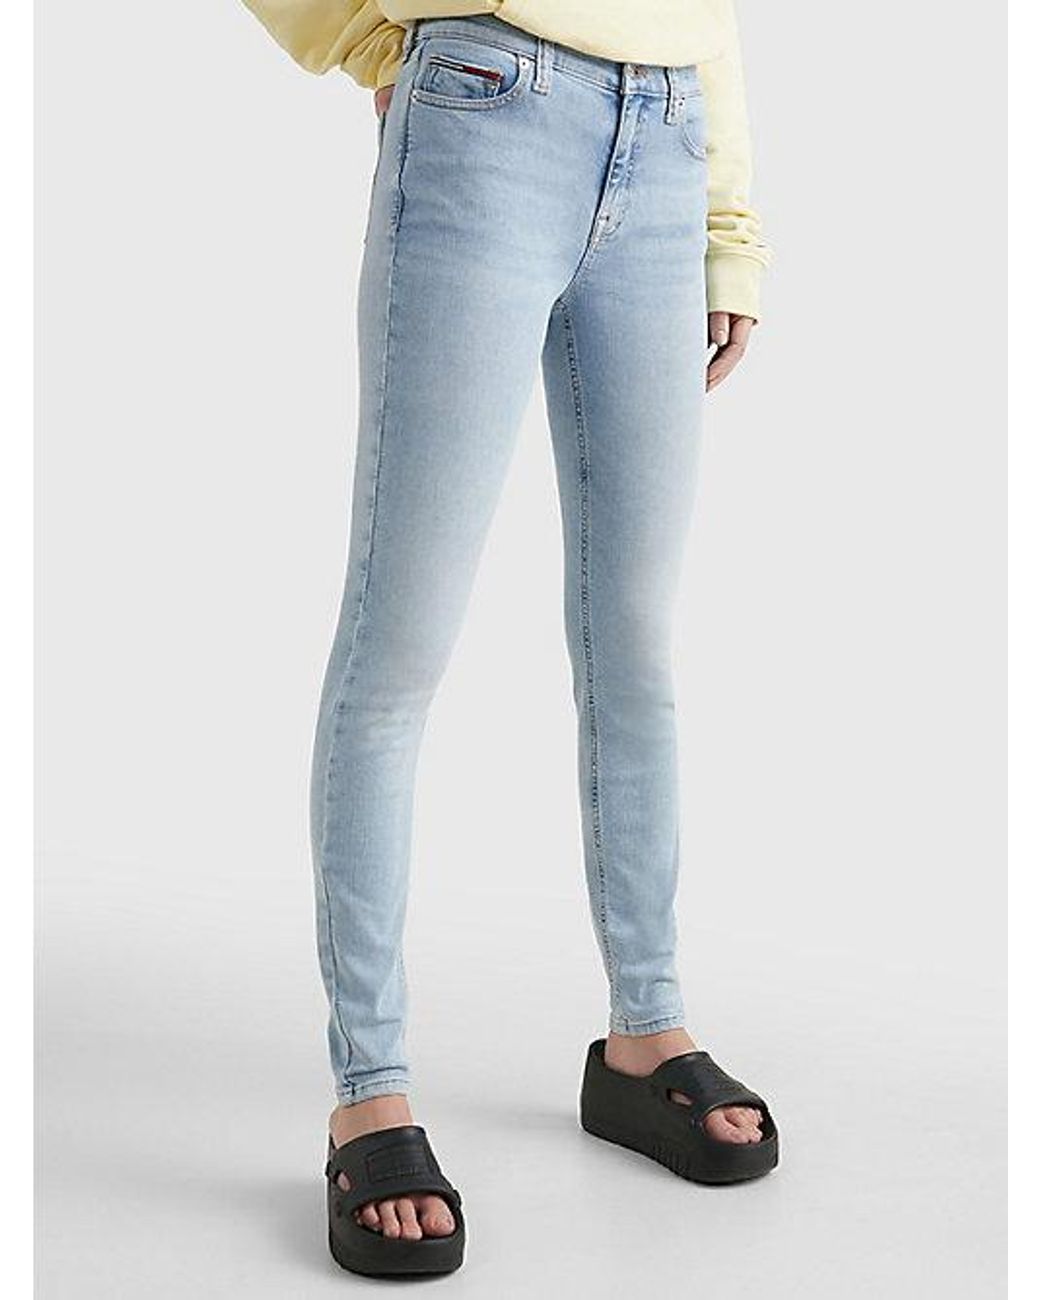 Tommy Hilfiger Nora Medium Rise Skinny Faded Jeans in het Blauw | Lyst NL